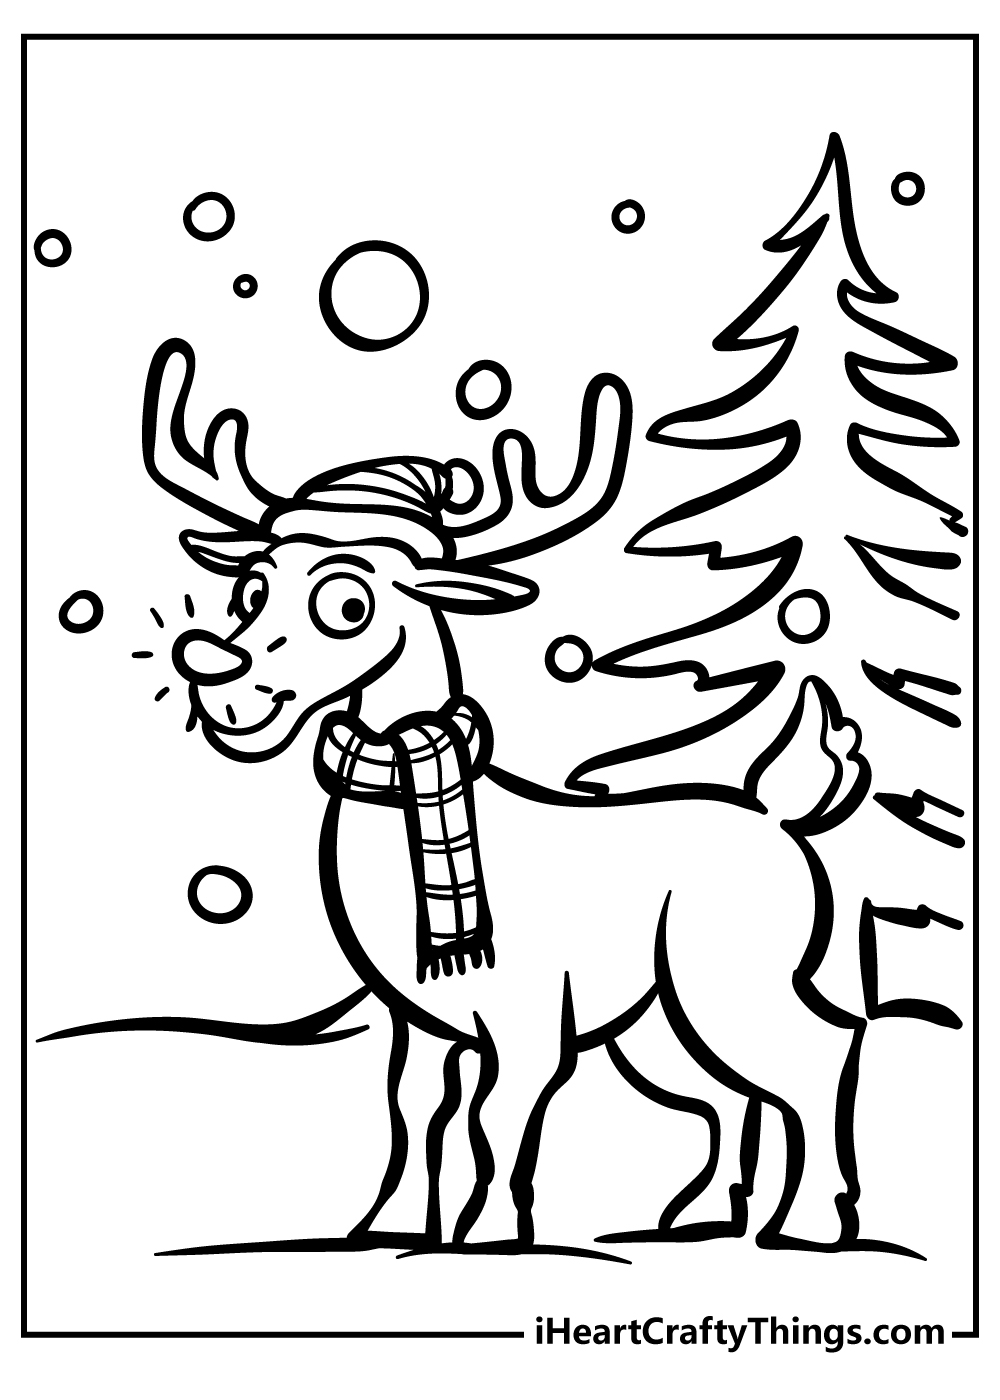 Rudolph Coloring Book for kids free printable